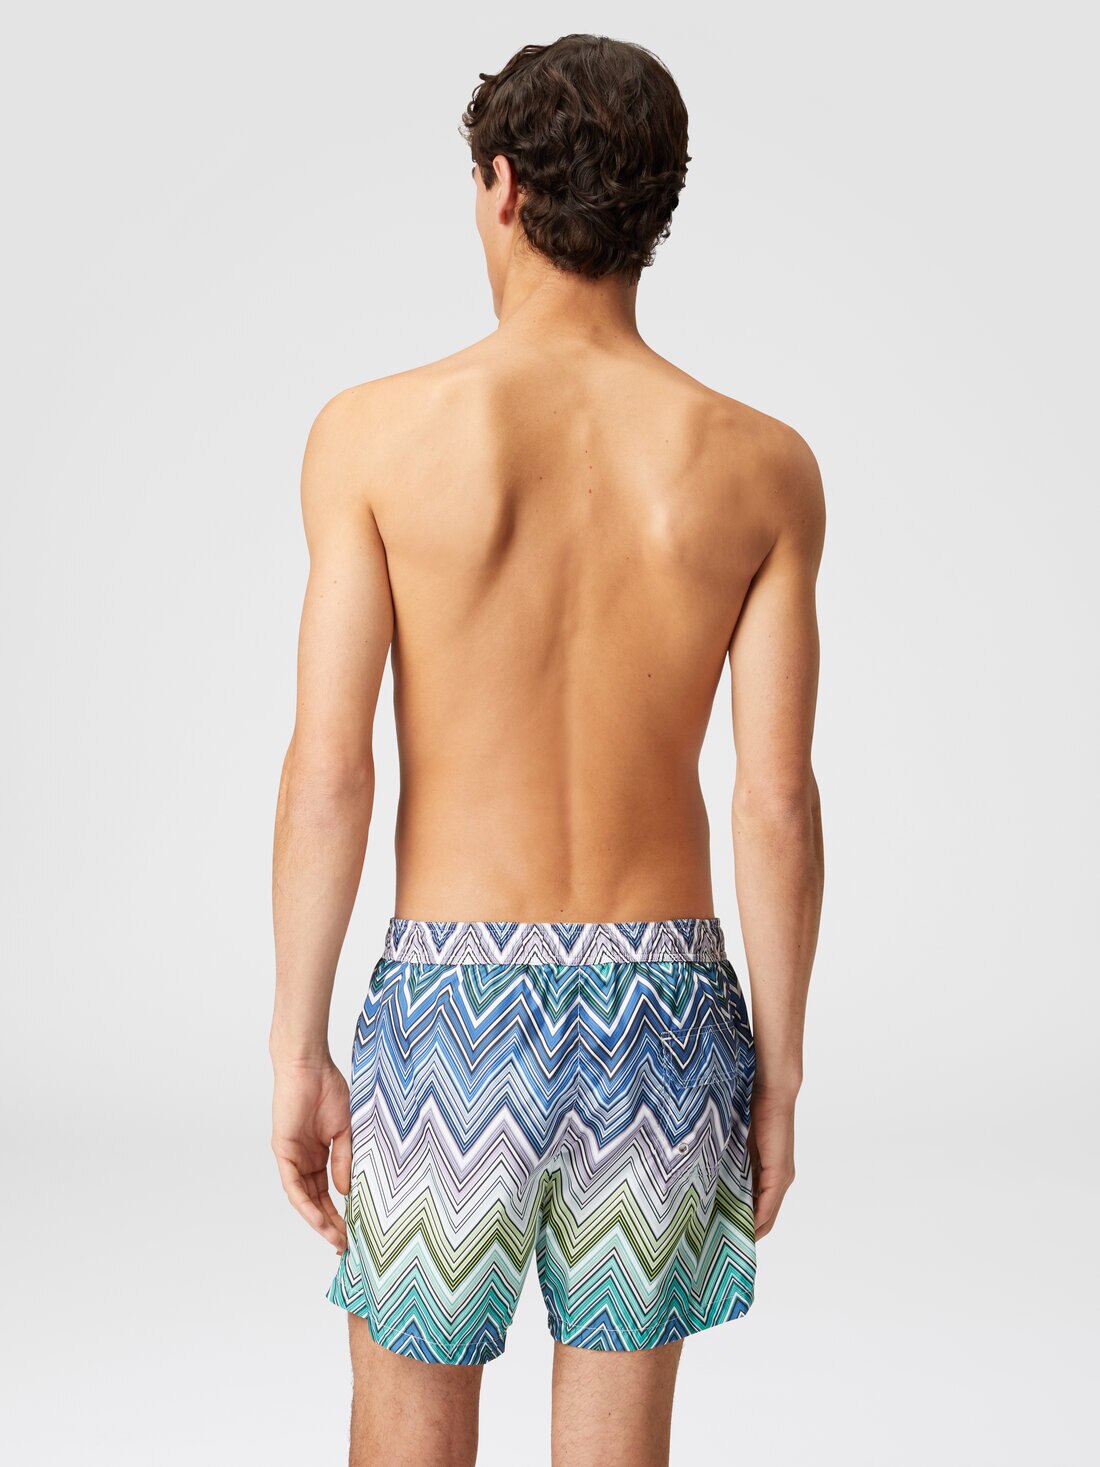 Swimming trunks with large zigzag print, Multicoloured  - US24SP00BW00S3SM991 - 2